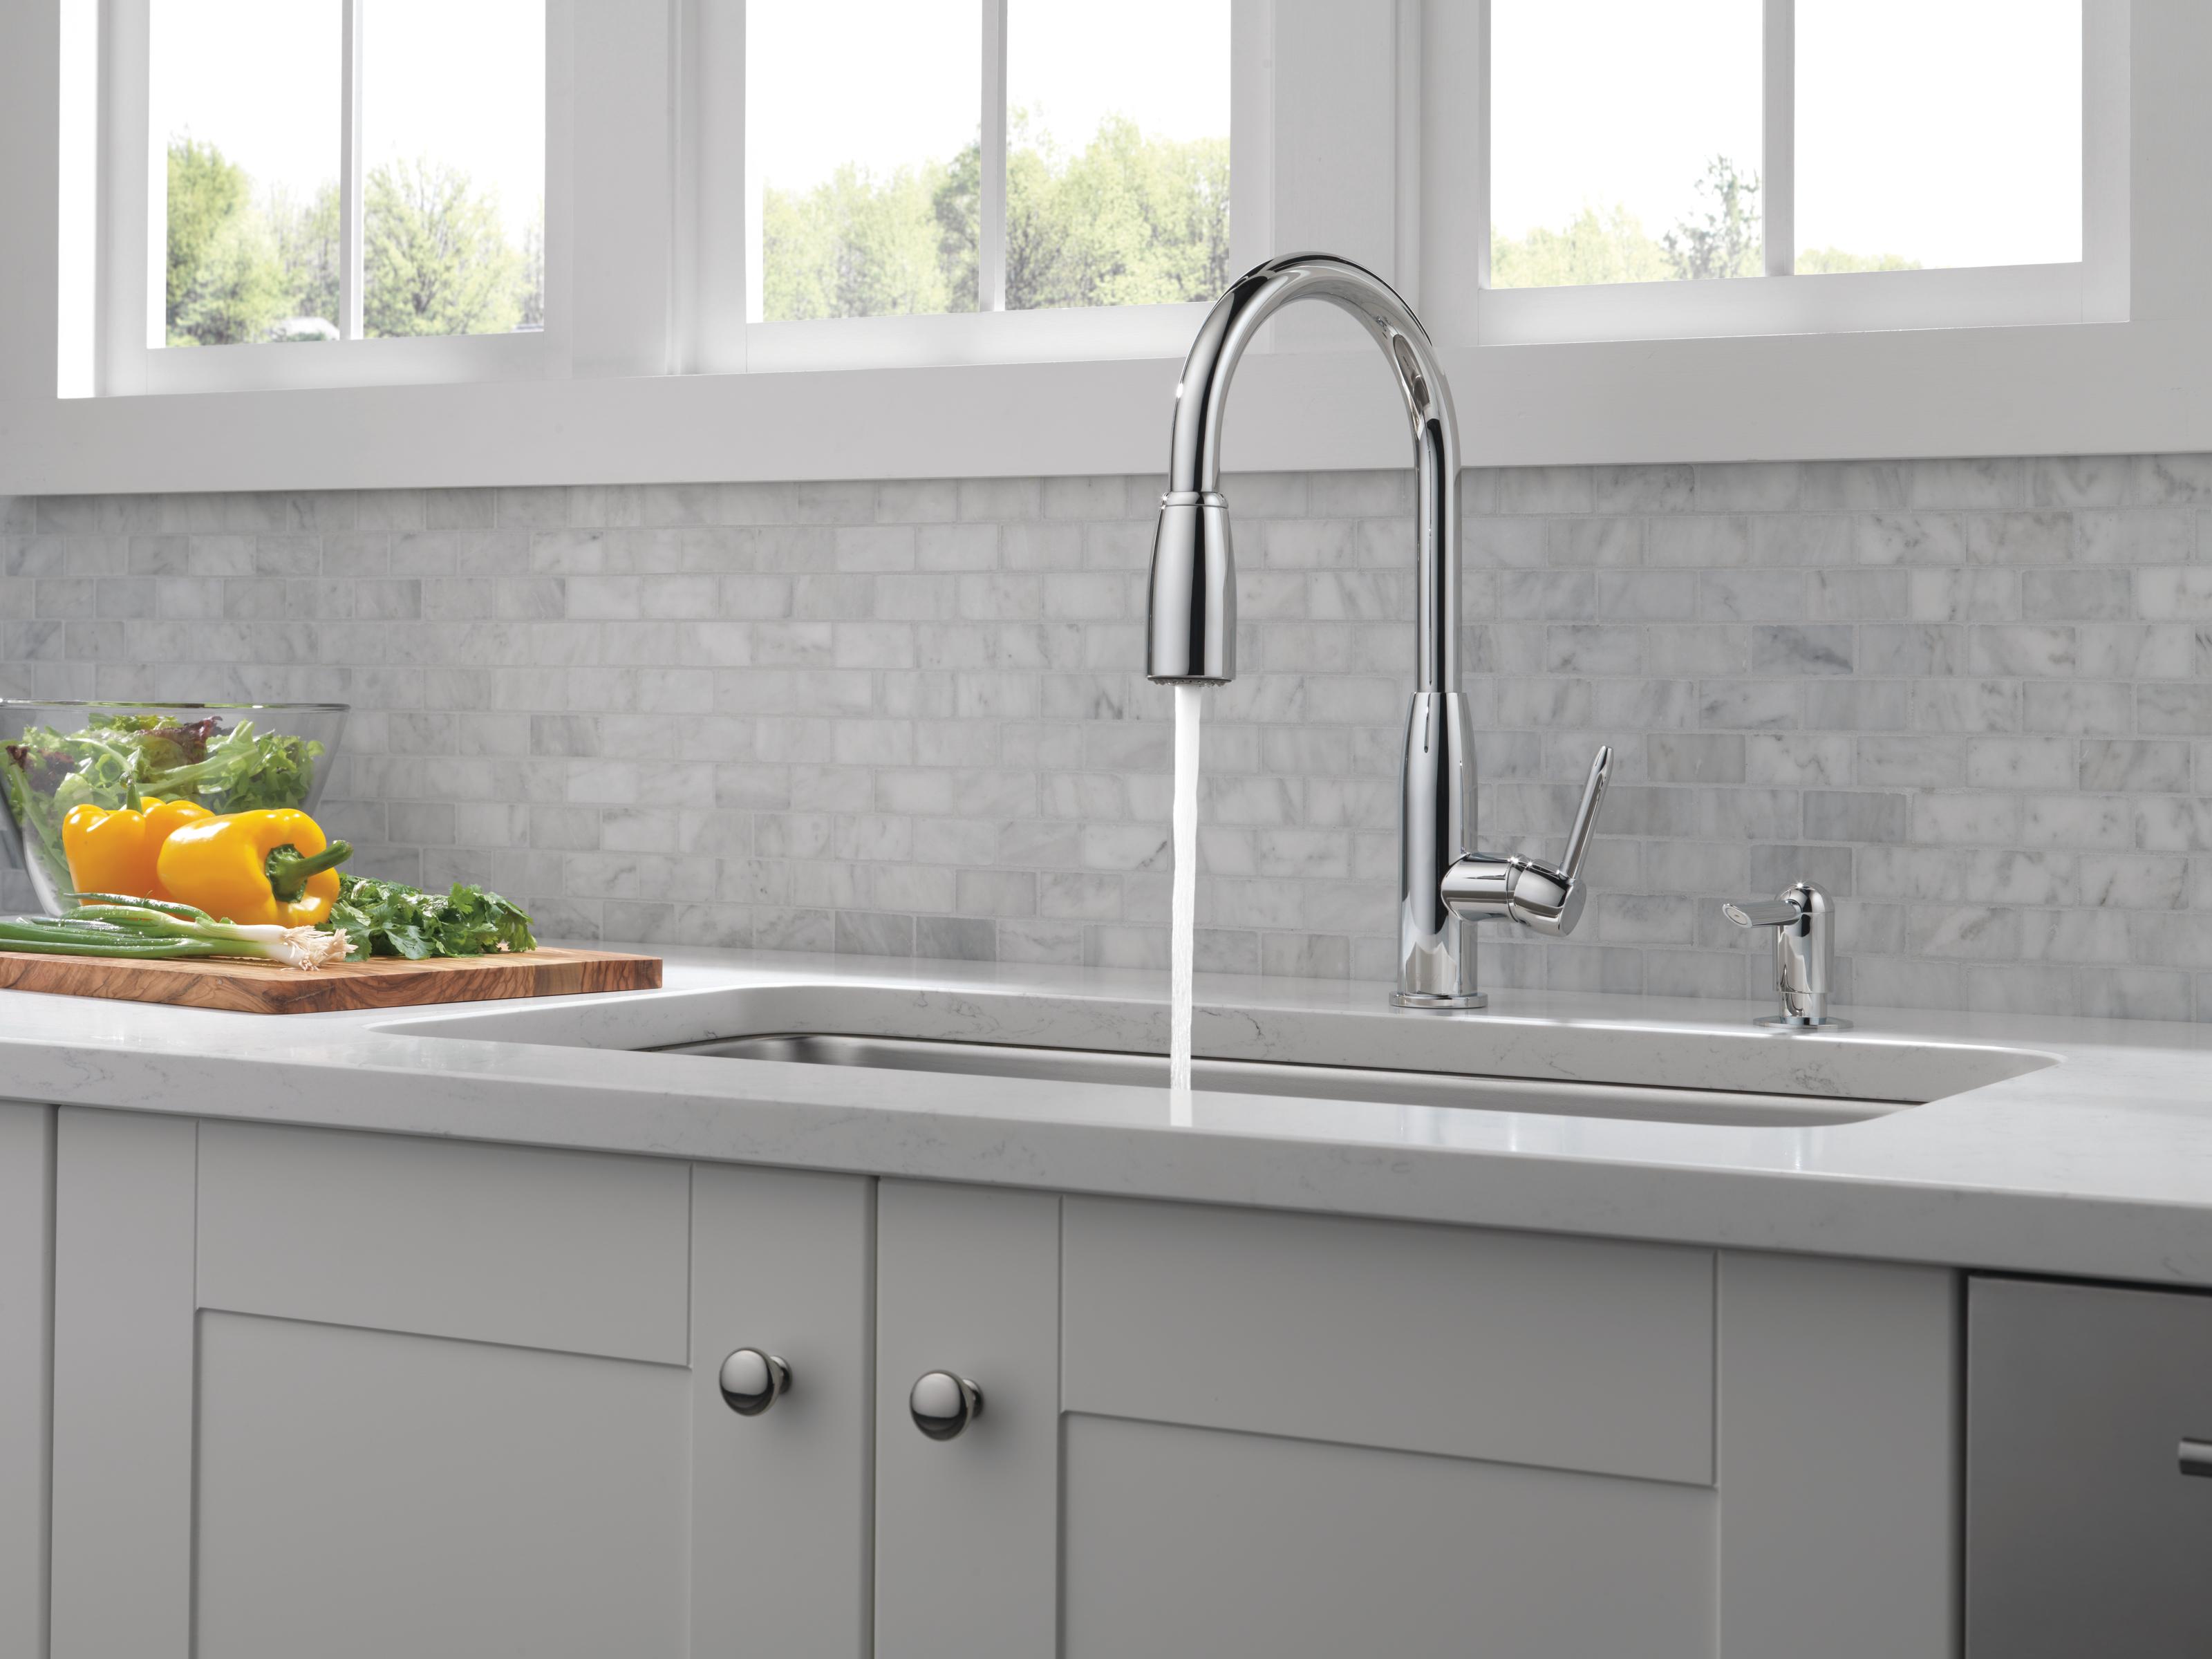 Peerless Core Kitchen Single Handle Pull-Down Faucet in Chrome P88103LF-SD-L - image 4 of 11